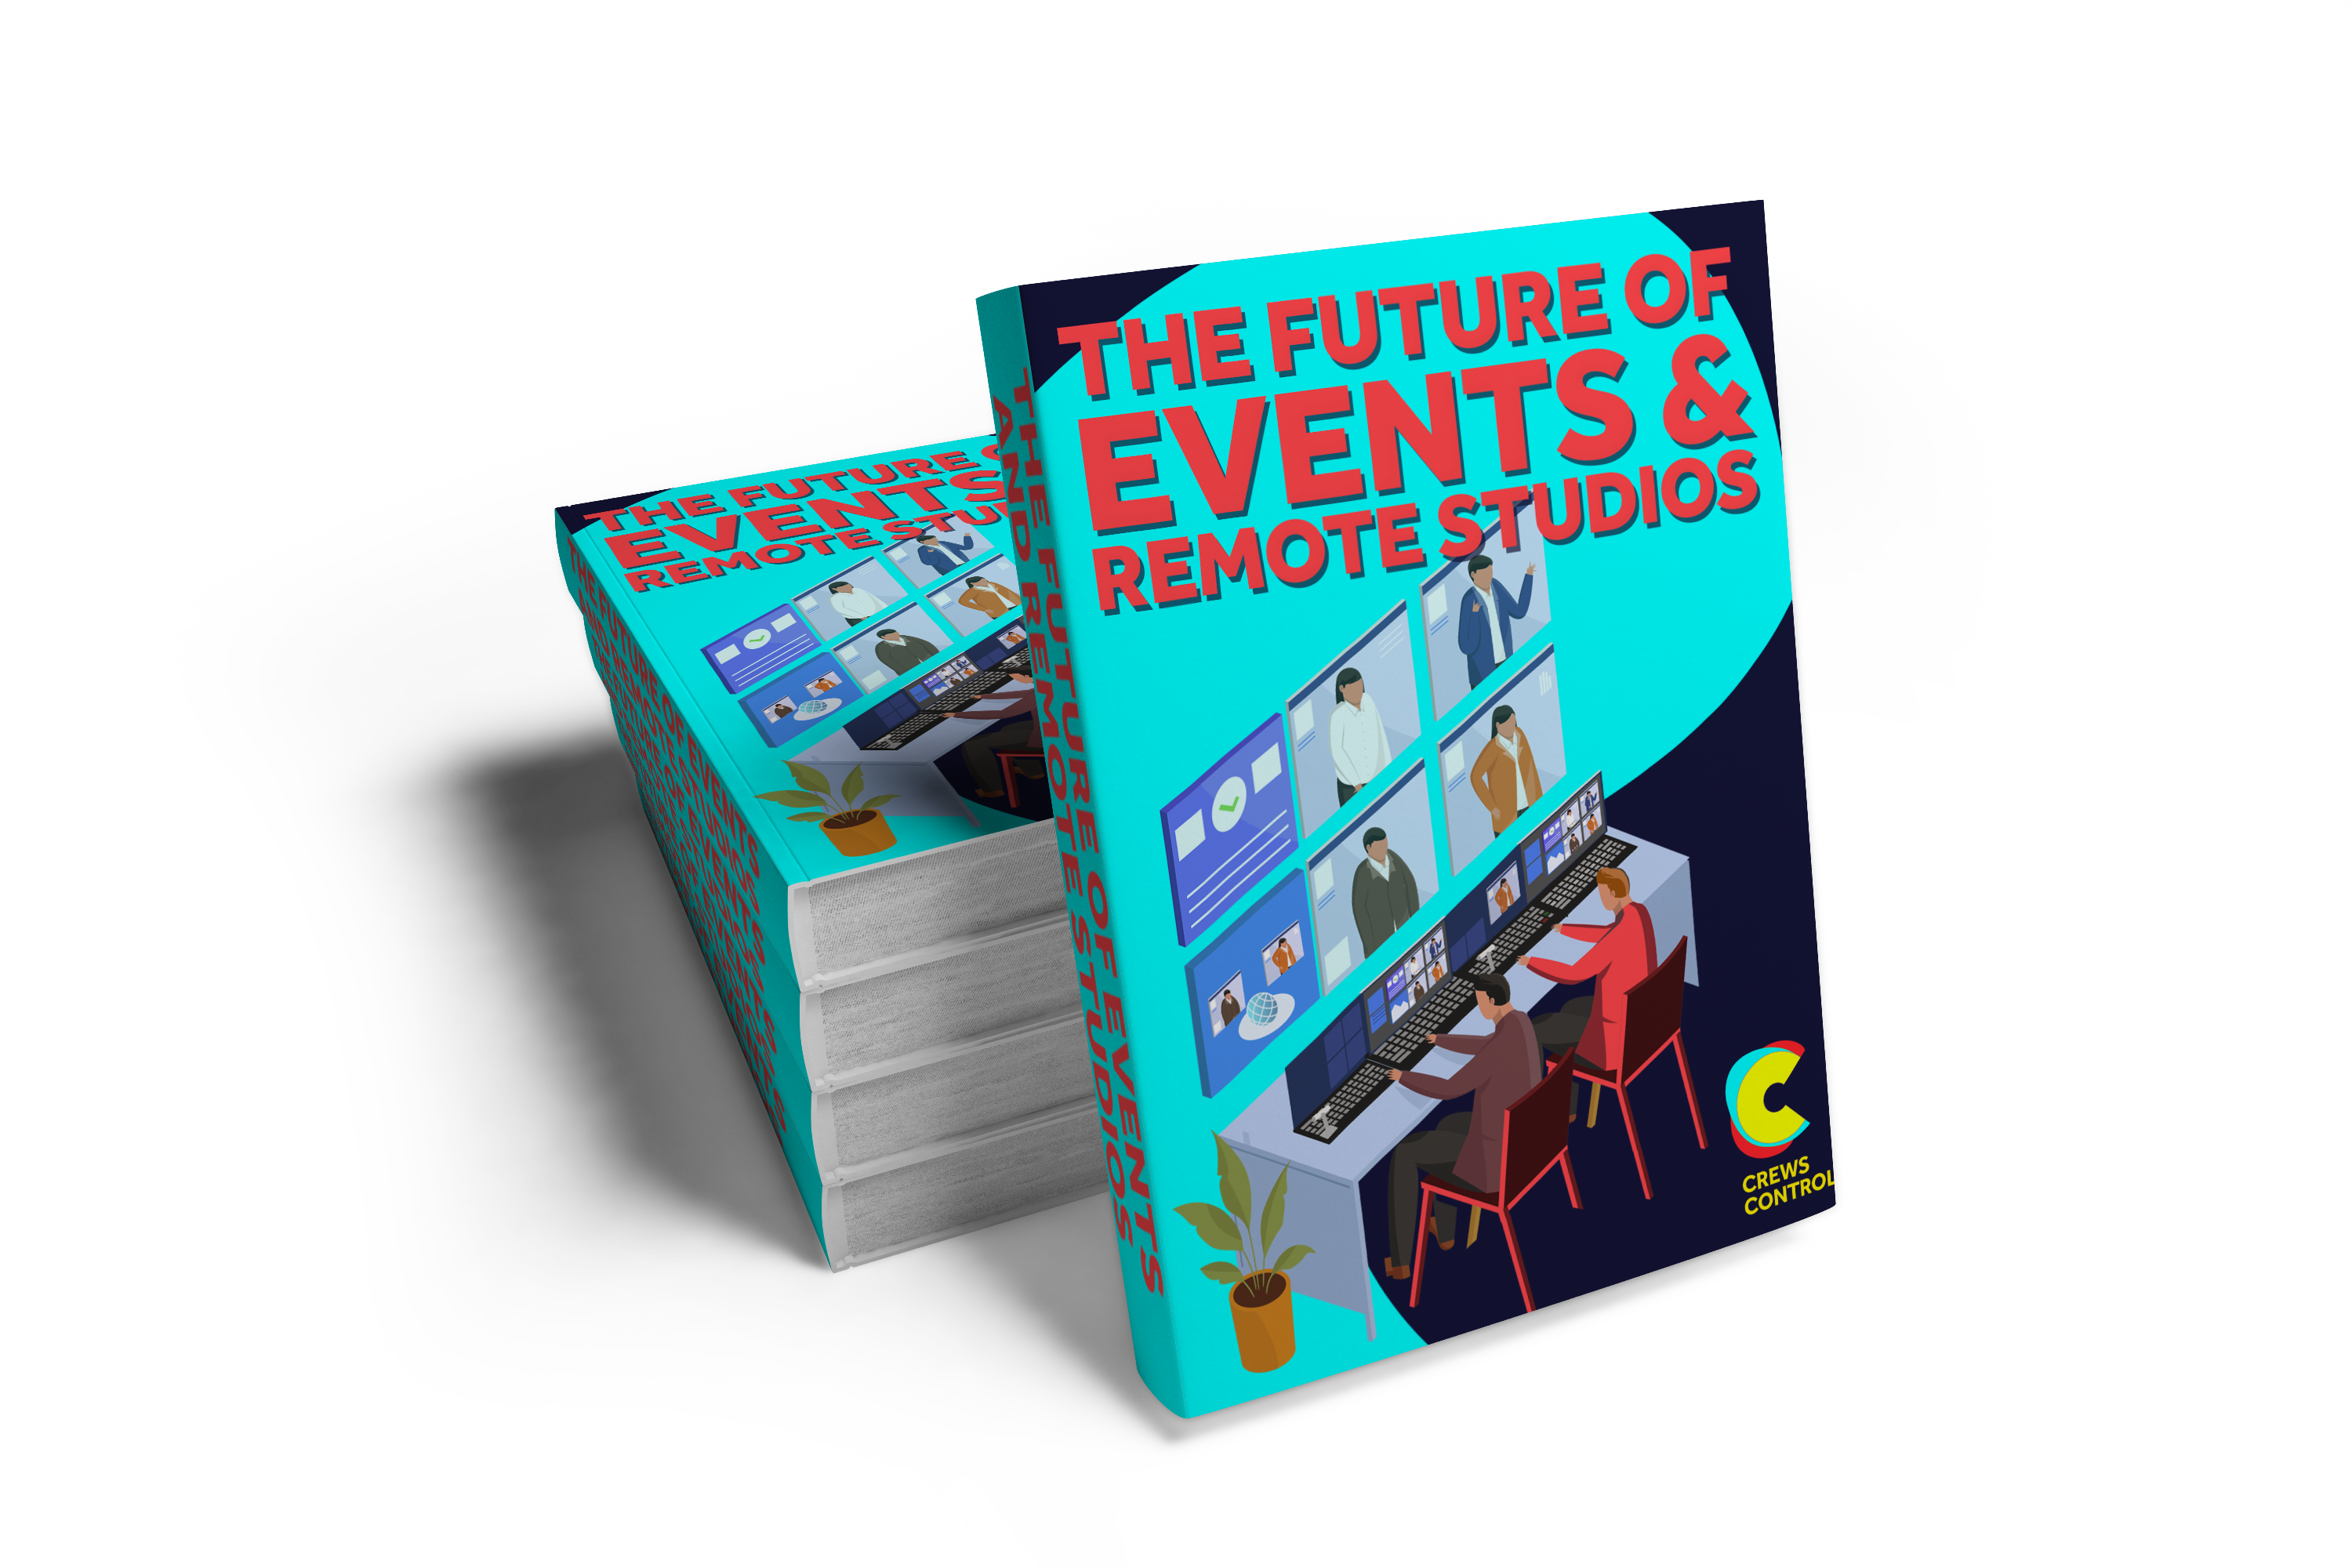 The future of events and remote studios free eBook!